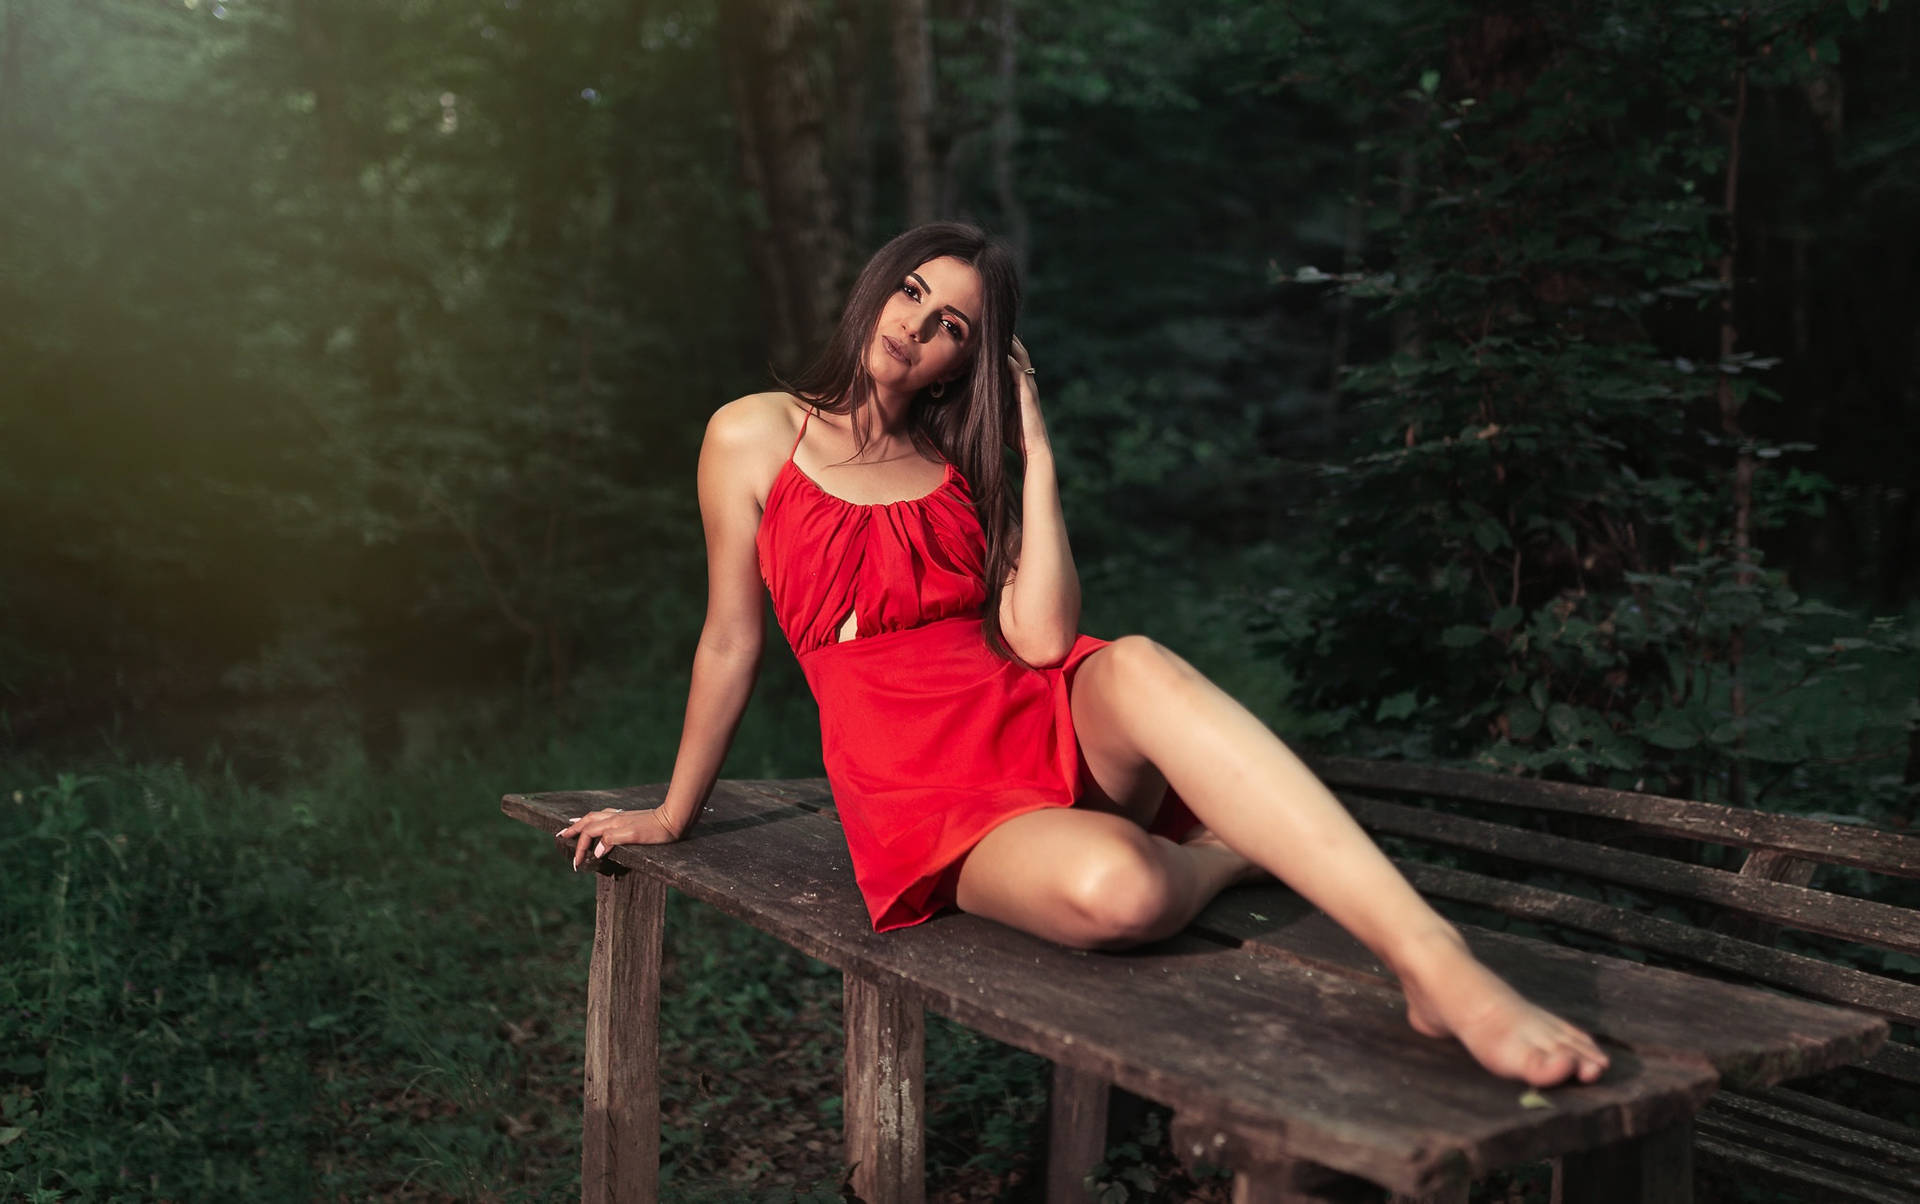 Woman In The Wood With Beautiful Legs Picture